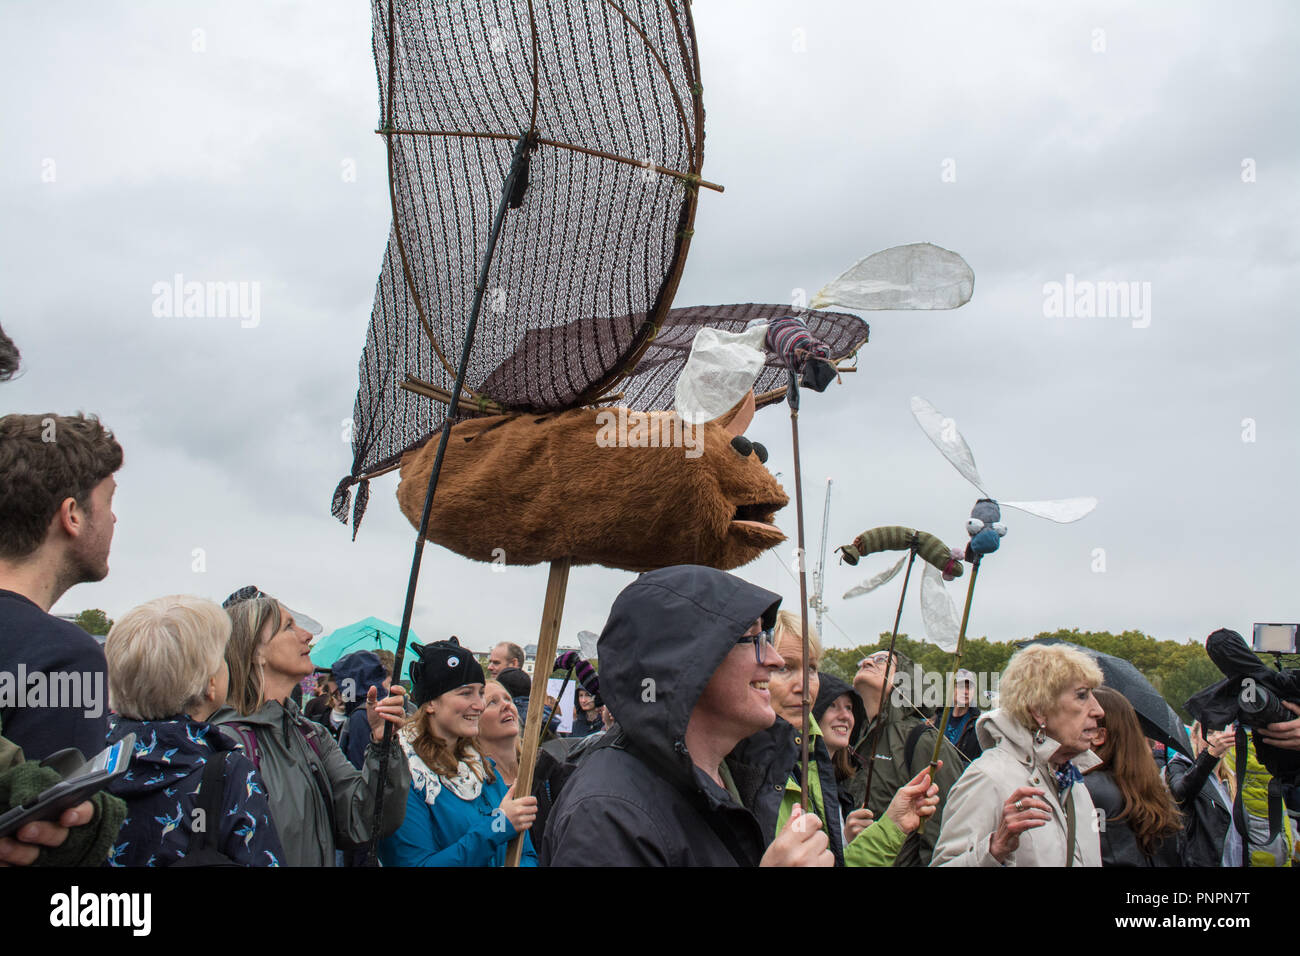 Hyde Park London, UK. 22nd Sept, 2018. Thousands of people who care about wildlife took part in the People's Walk for Wildlife organised by naturalist and broadcaster, Chris Packham. The march to demonstrate support for nature started in Hyde Park, and passed through Picadilly, St. James, Pall Mall, Cockspur St, and Whitehall, finishing at Richmond Terrace. A draft of 'A People's Manifesto for Wildlife', which was published this week and contains 200 ideas to protect wildlife, will be presented to Downing Street. Stock Photo